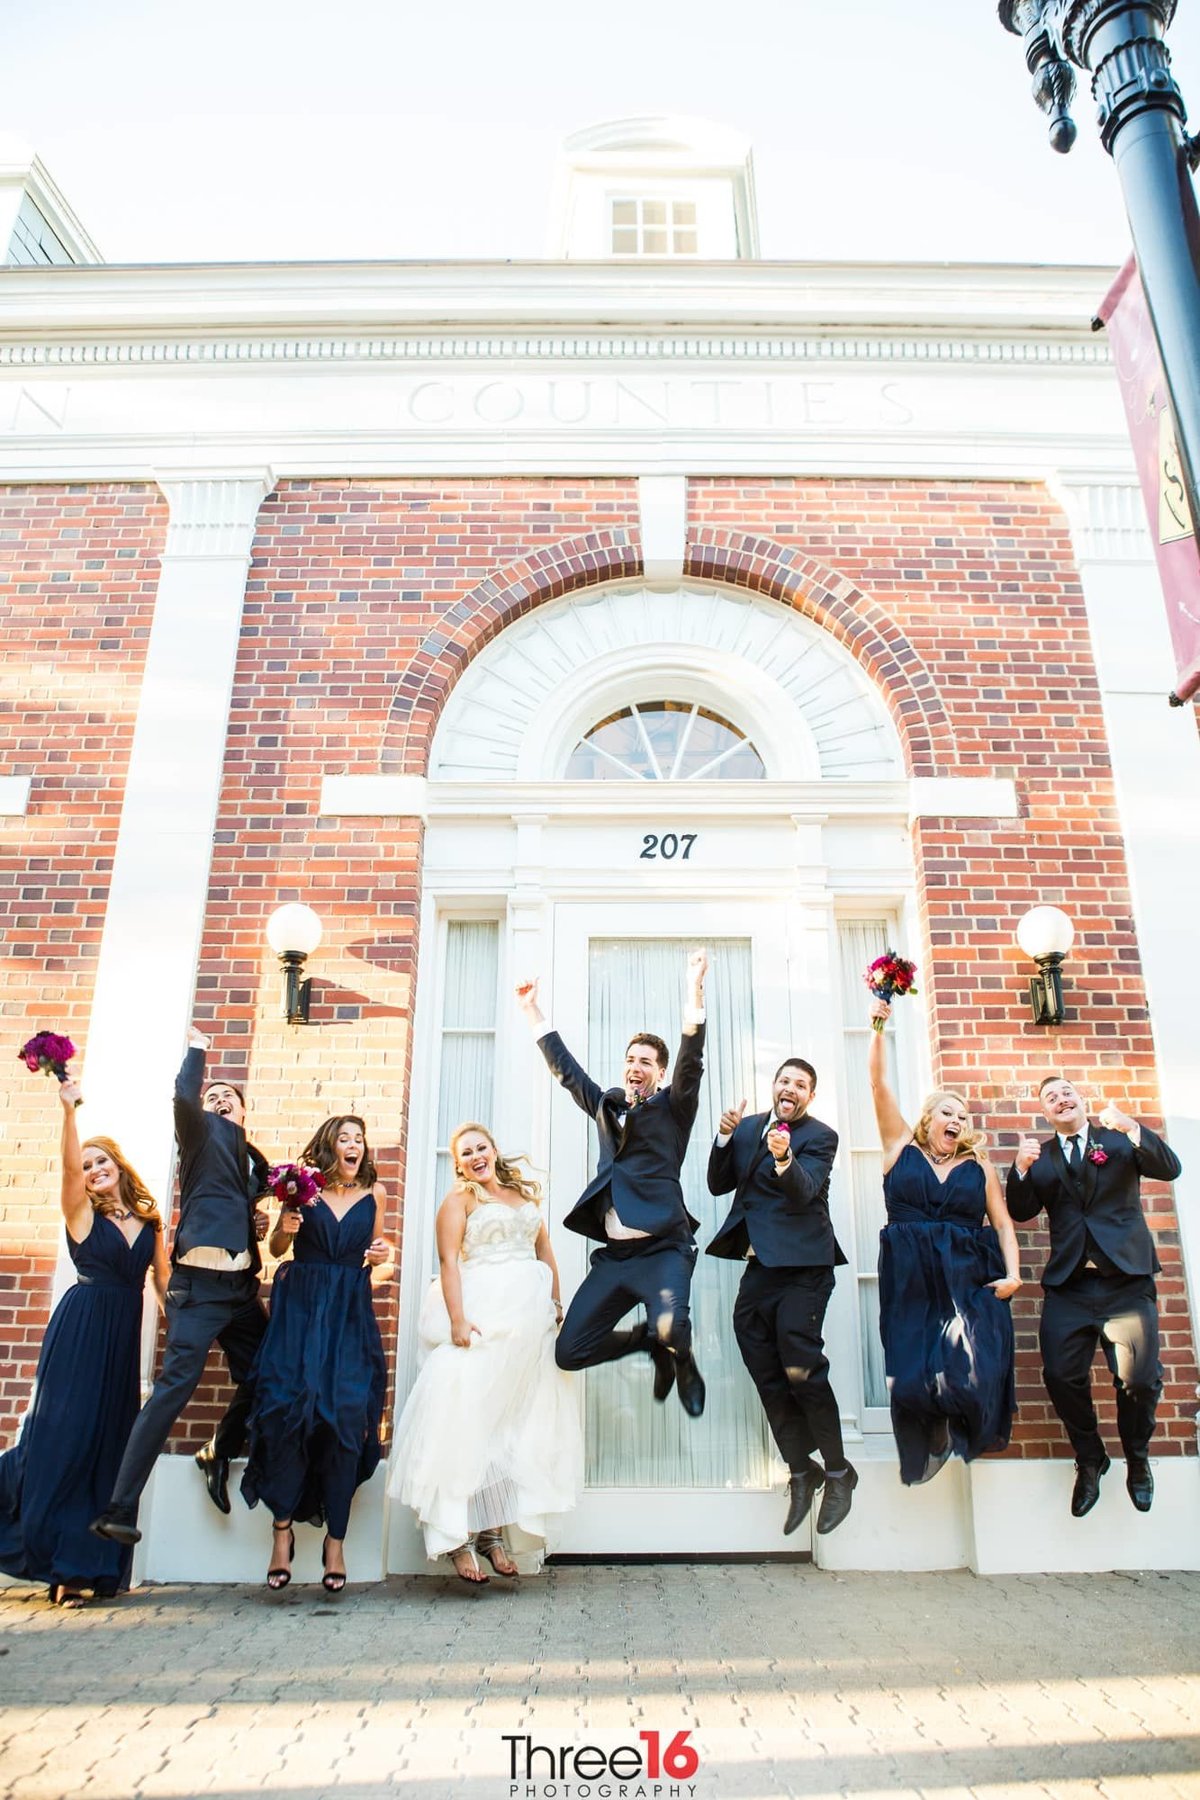 Bridal Party jumps for joy